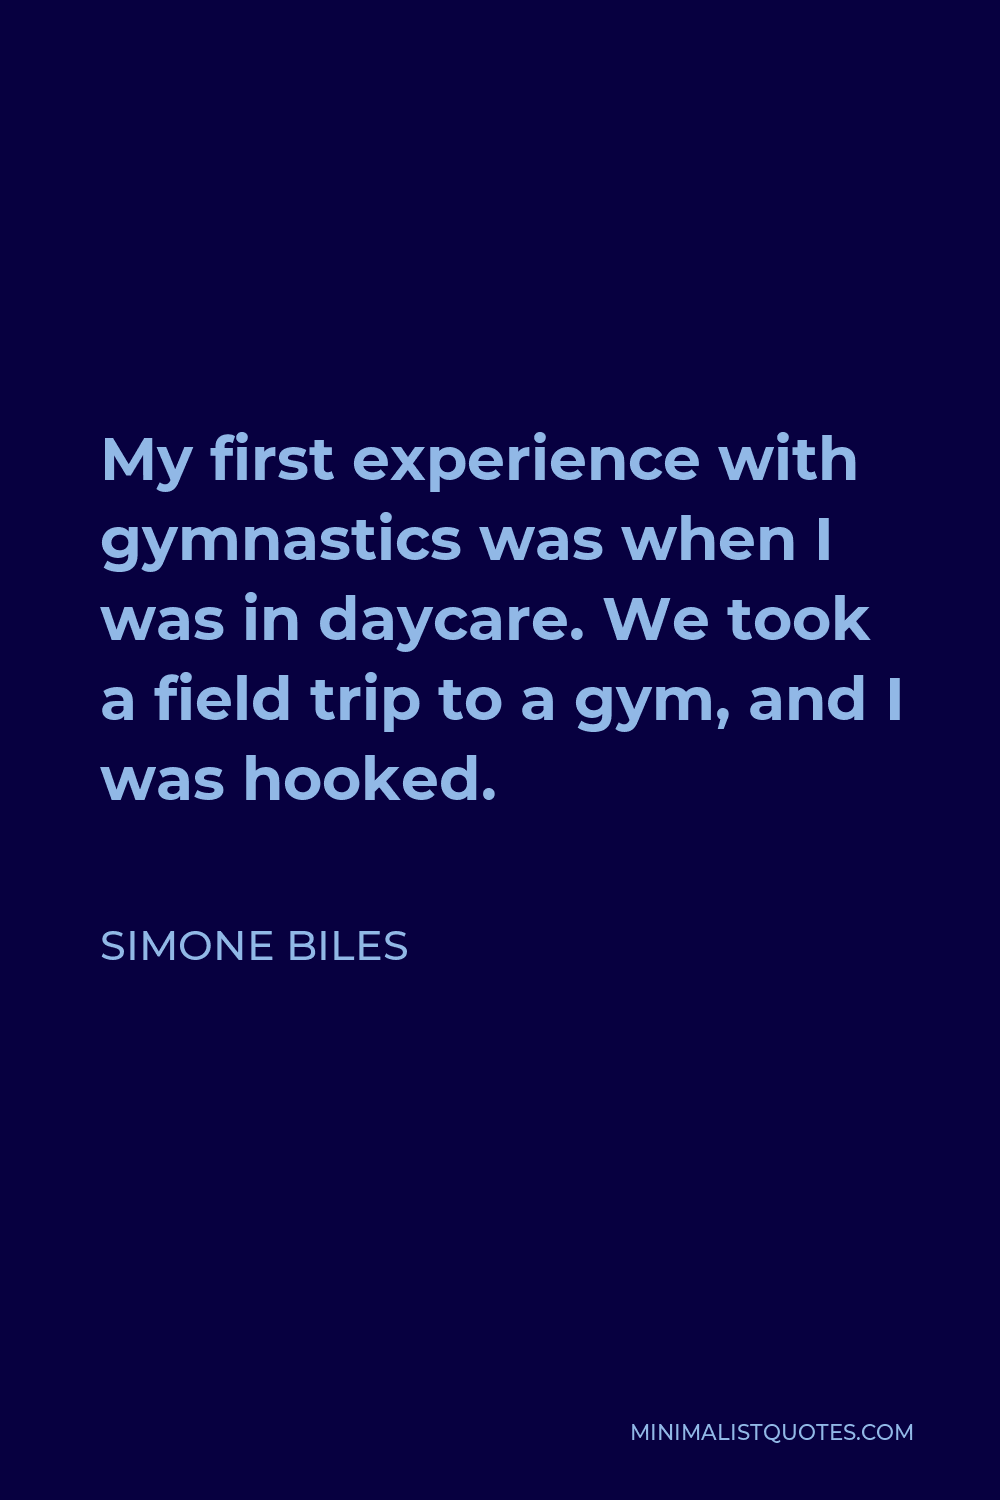 Simone Biles Quote - My first experience with gymnastics was when I was in daycare. We took a field trip to a gym, and I was hooked.